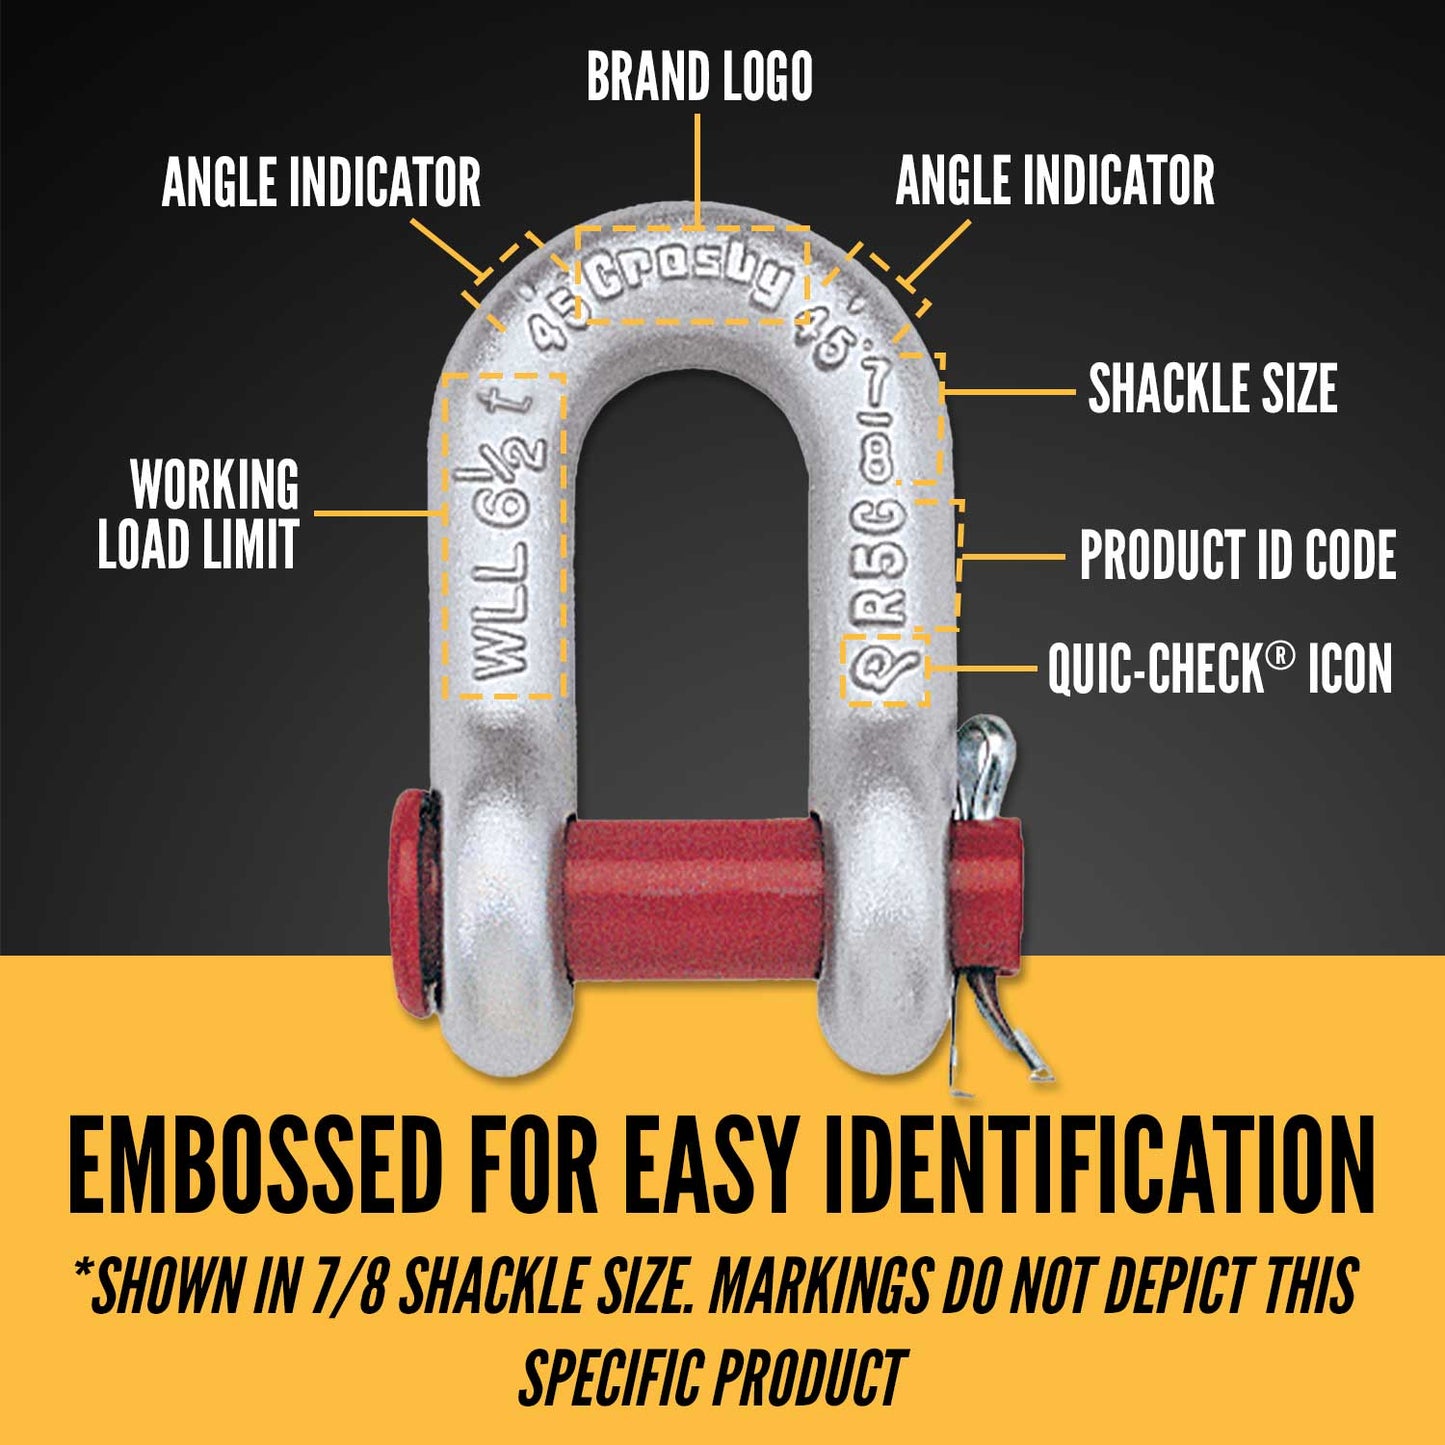 7/16" Crosby® Round Pin Chain Shackle | G-215 - 1.5 Ton embossed for easy identification